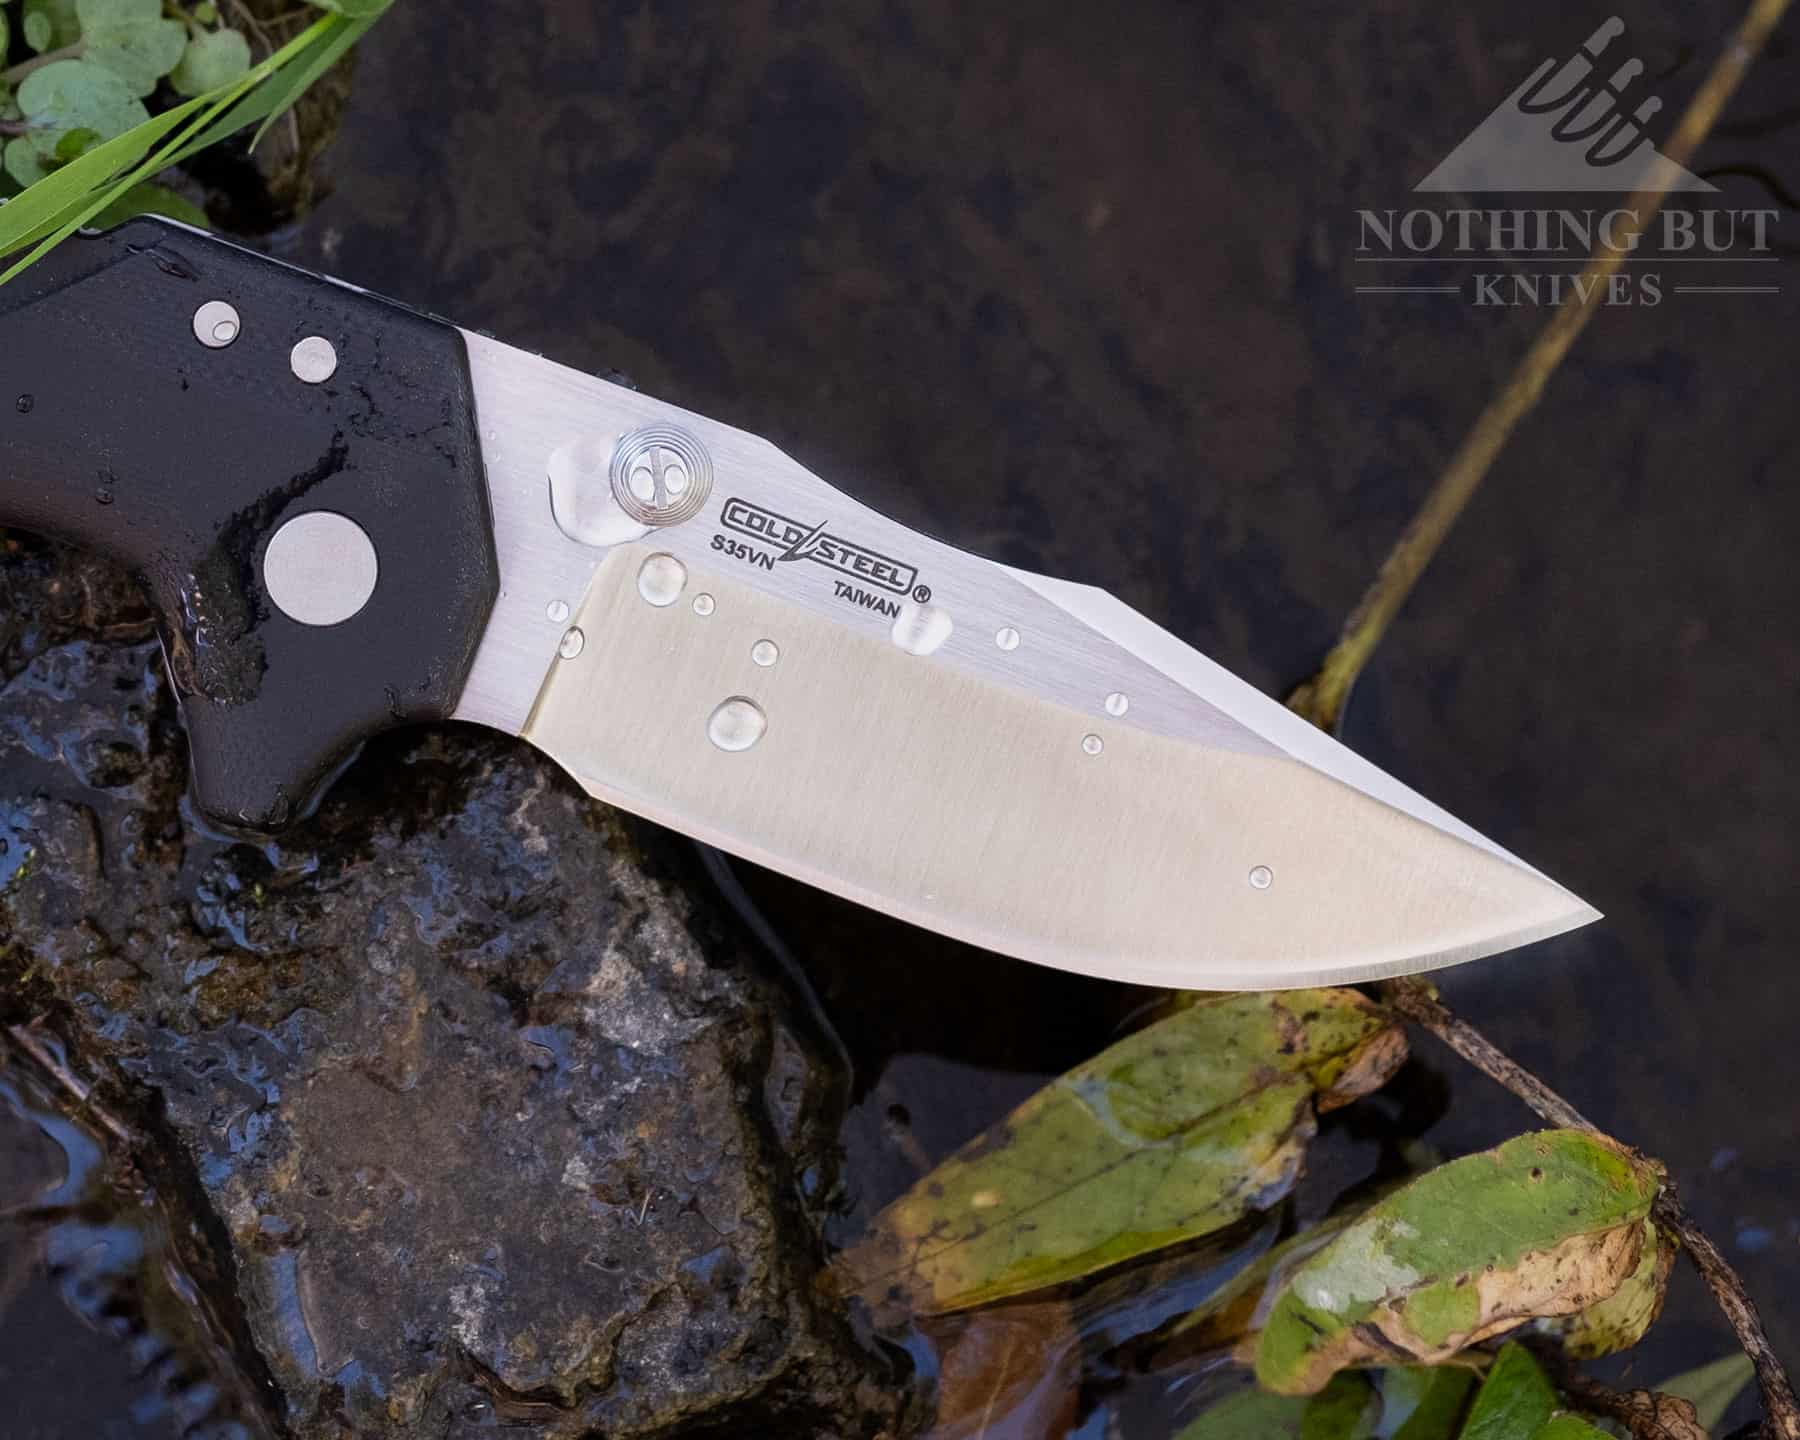 The Cold Steel Engage pocket knife blade is  made of S35VN steel, and it offers good edge retention and corrosion resistance. 